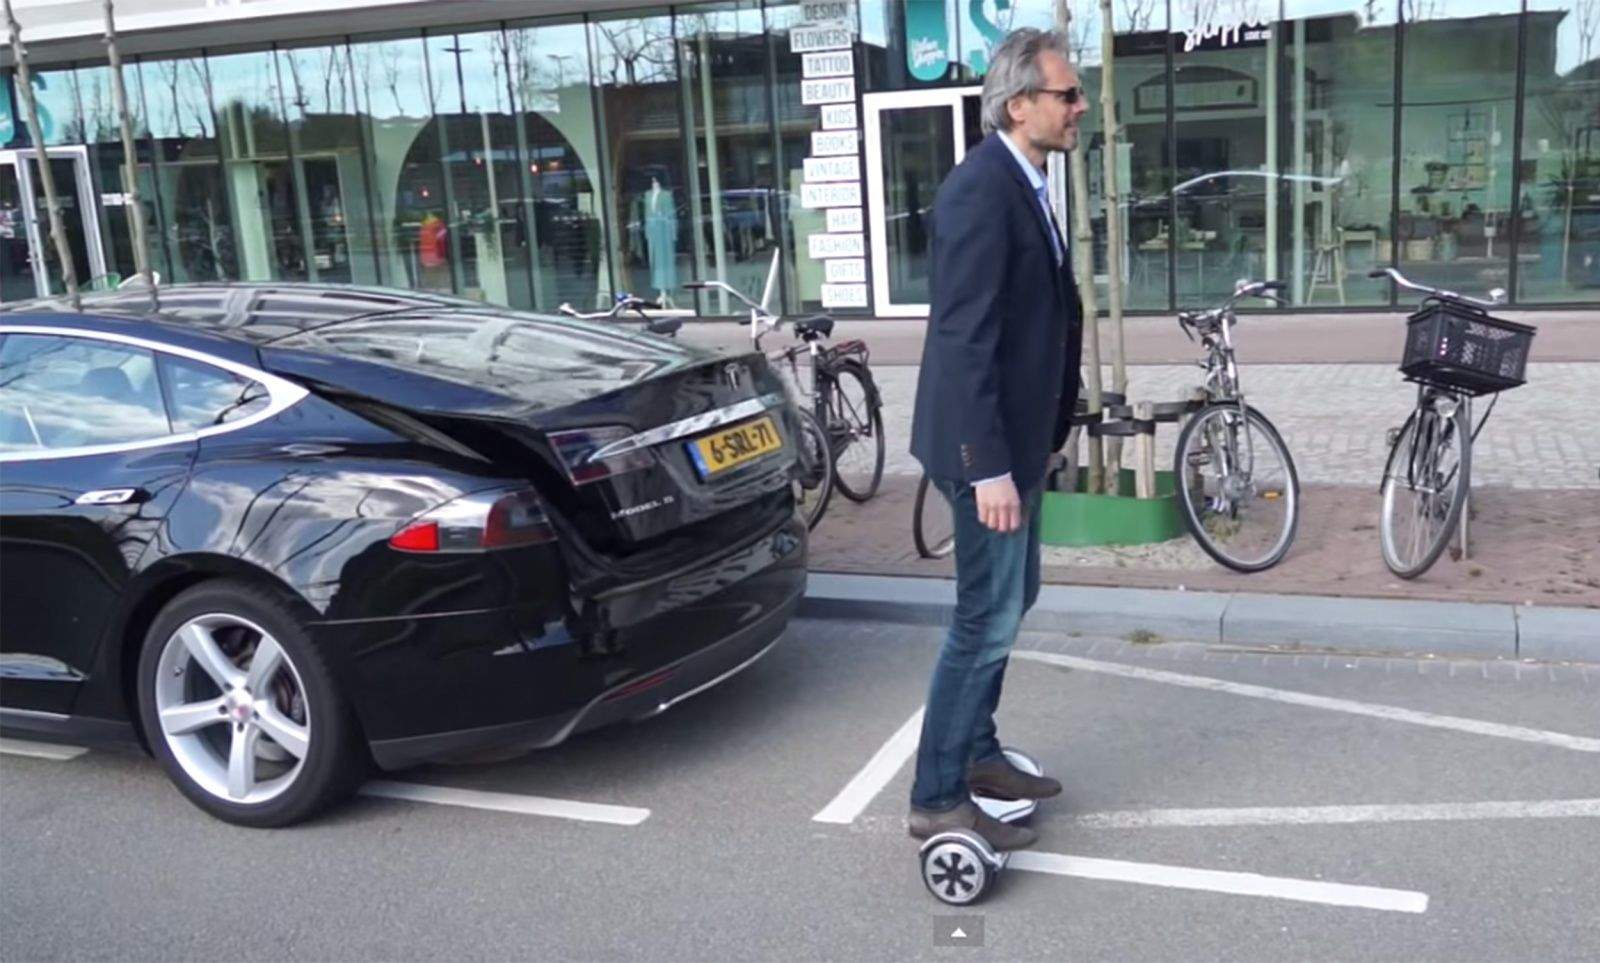 The self-balancing Oxboard works like a Segway but is less bulky and needs less room to move.